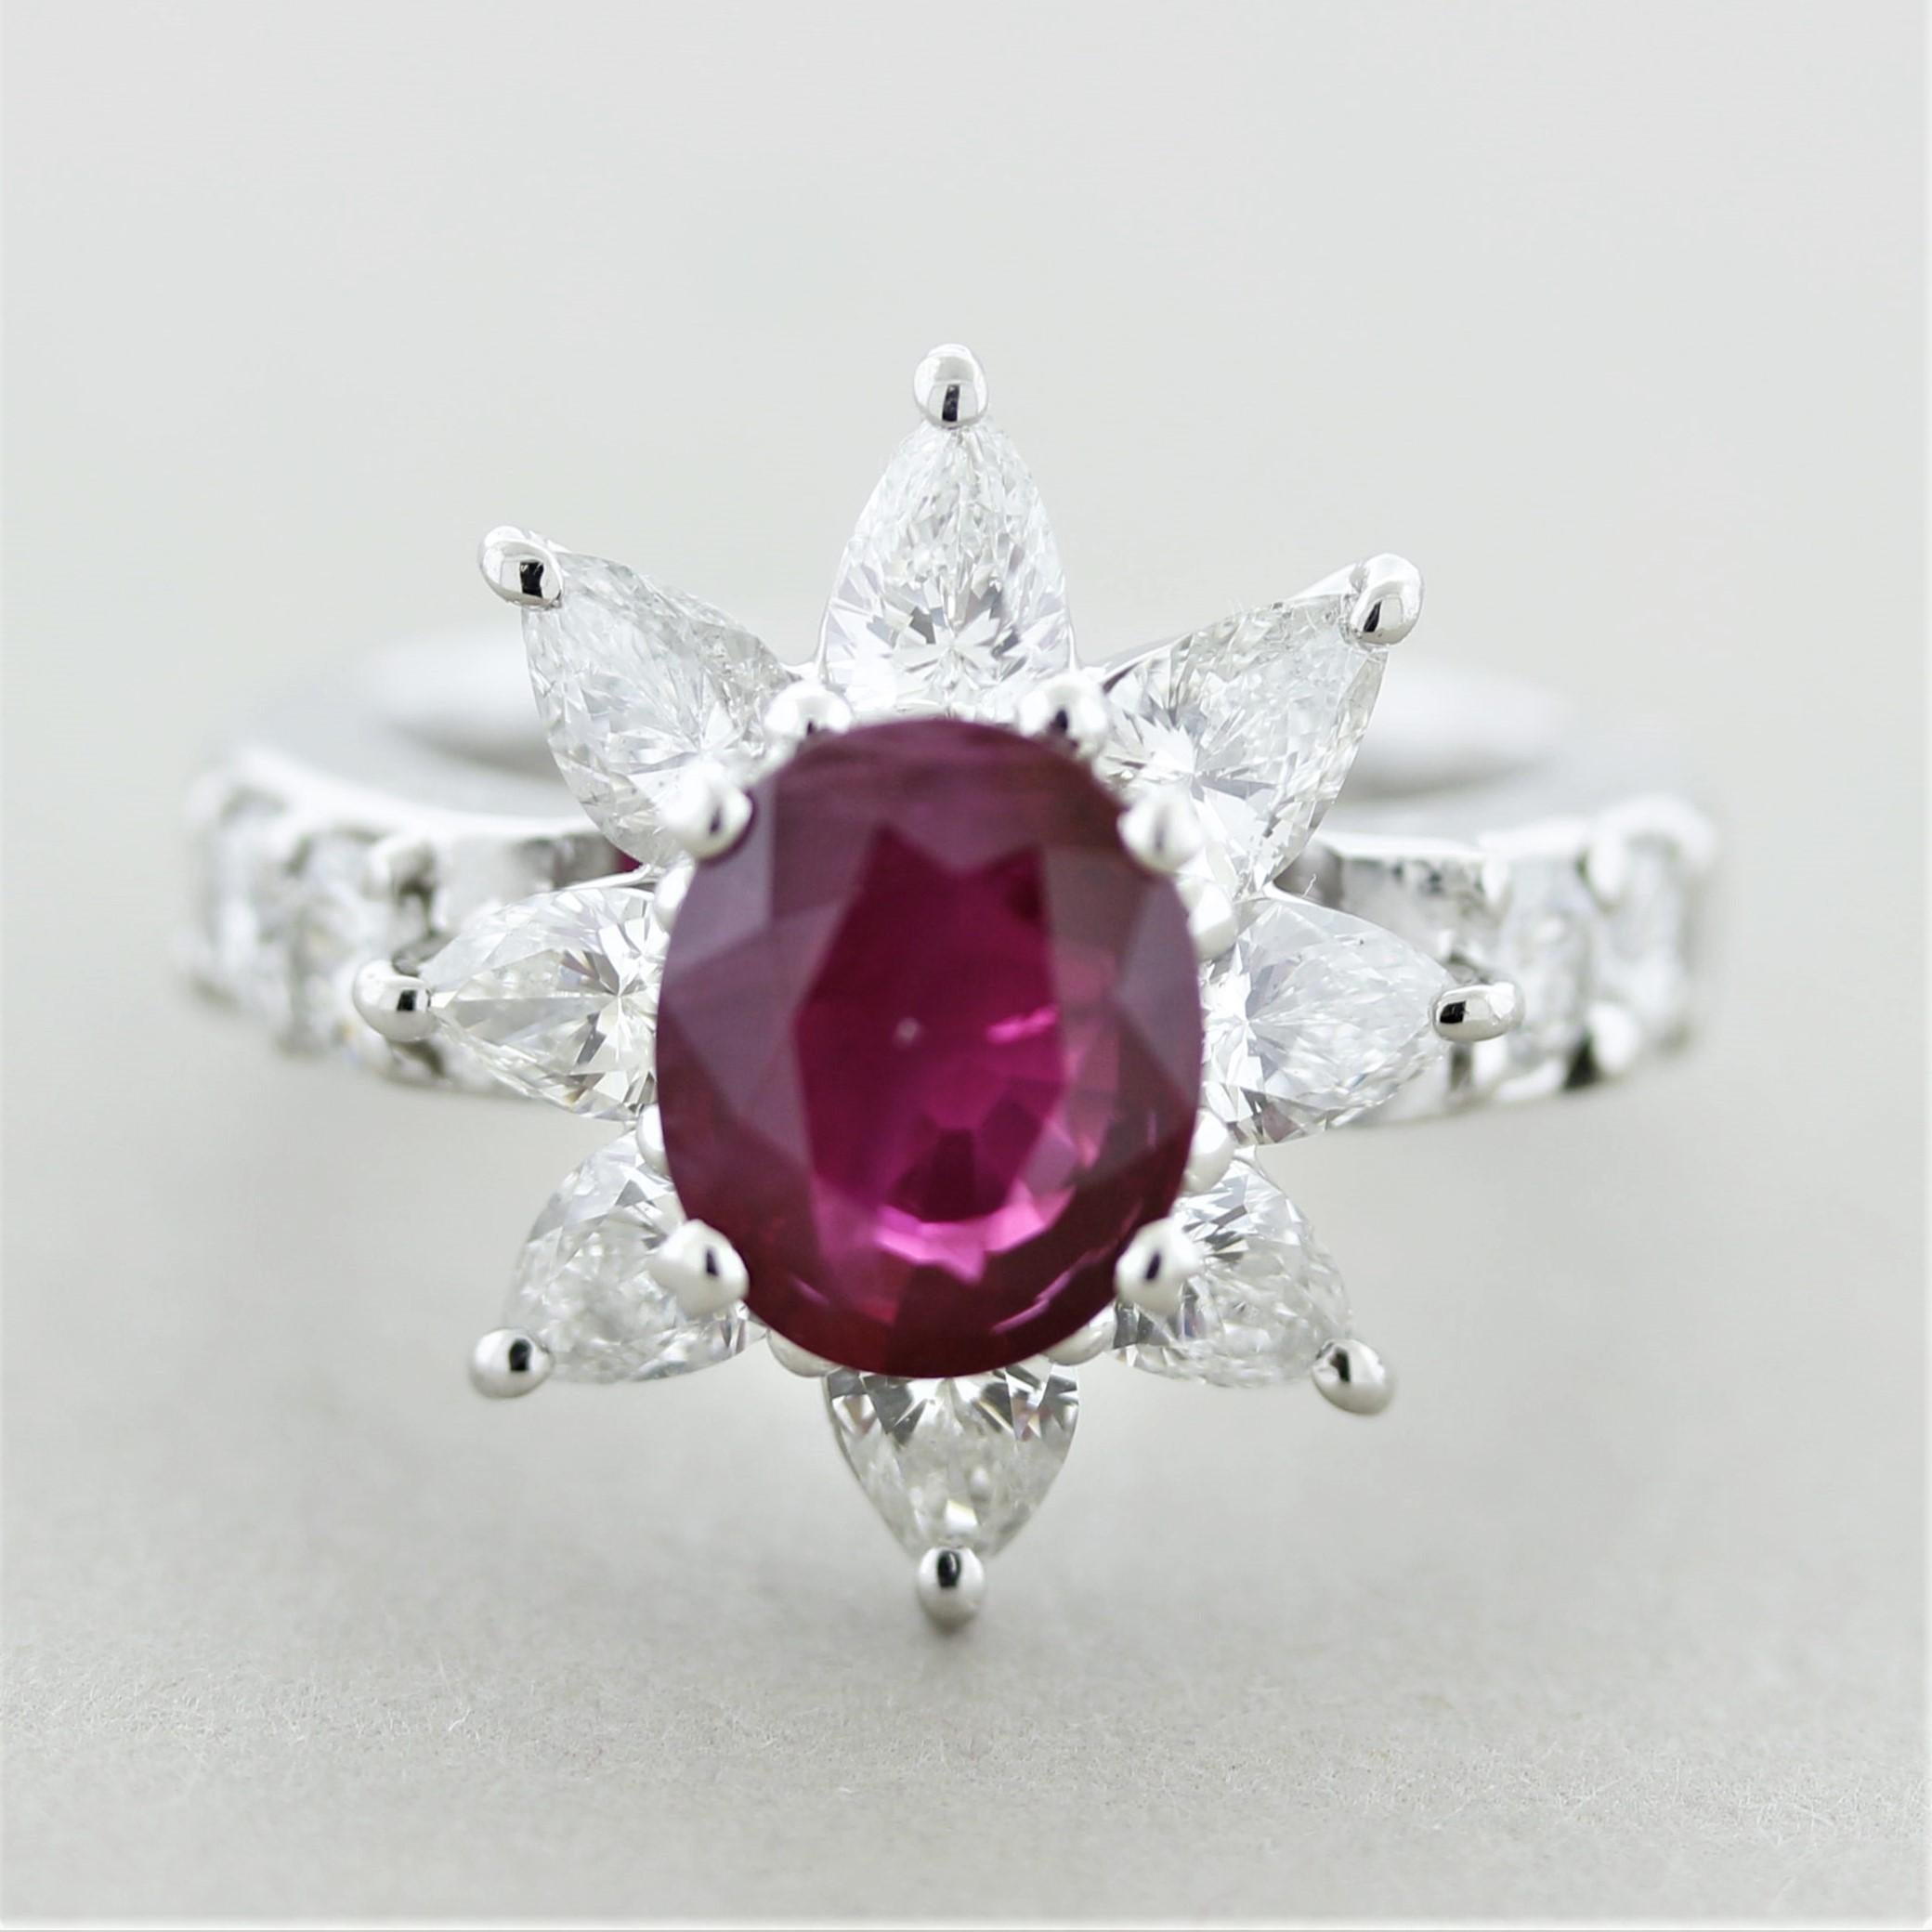 A superb oval shaped ruby weighing 2.05 carats takes center stage of this flower themed ring. The ruby is certified by the GIA as natural and has a lovely rich red color. It is accented by large pear-shaped diamonds set on its outsides creating a